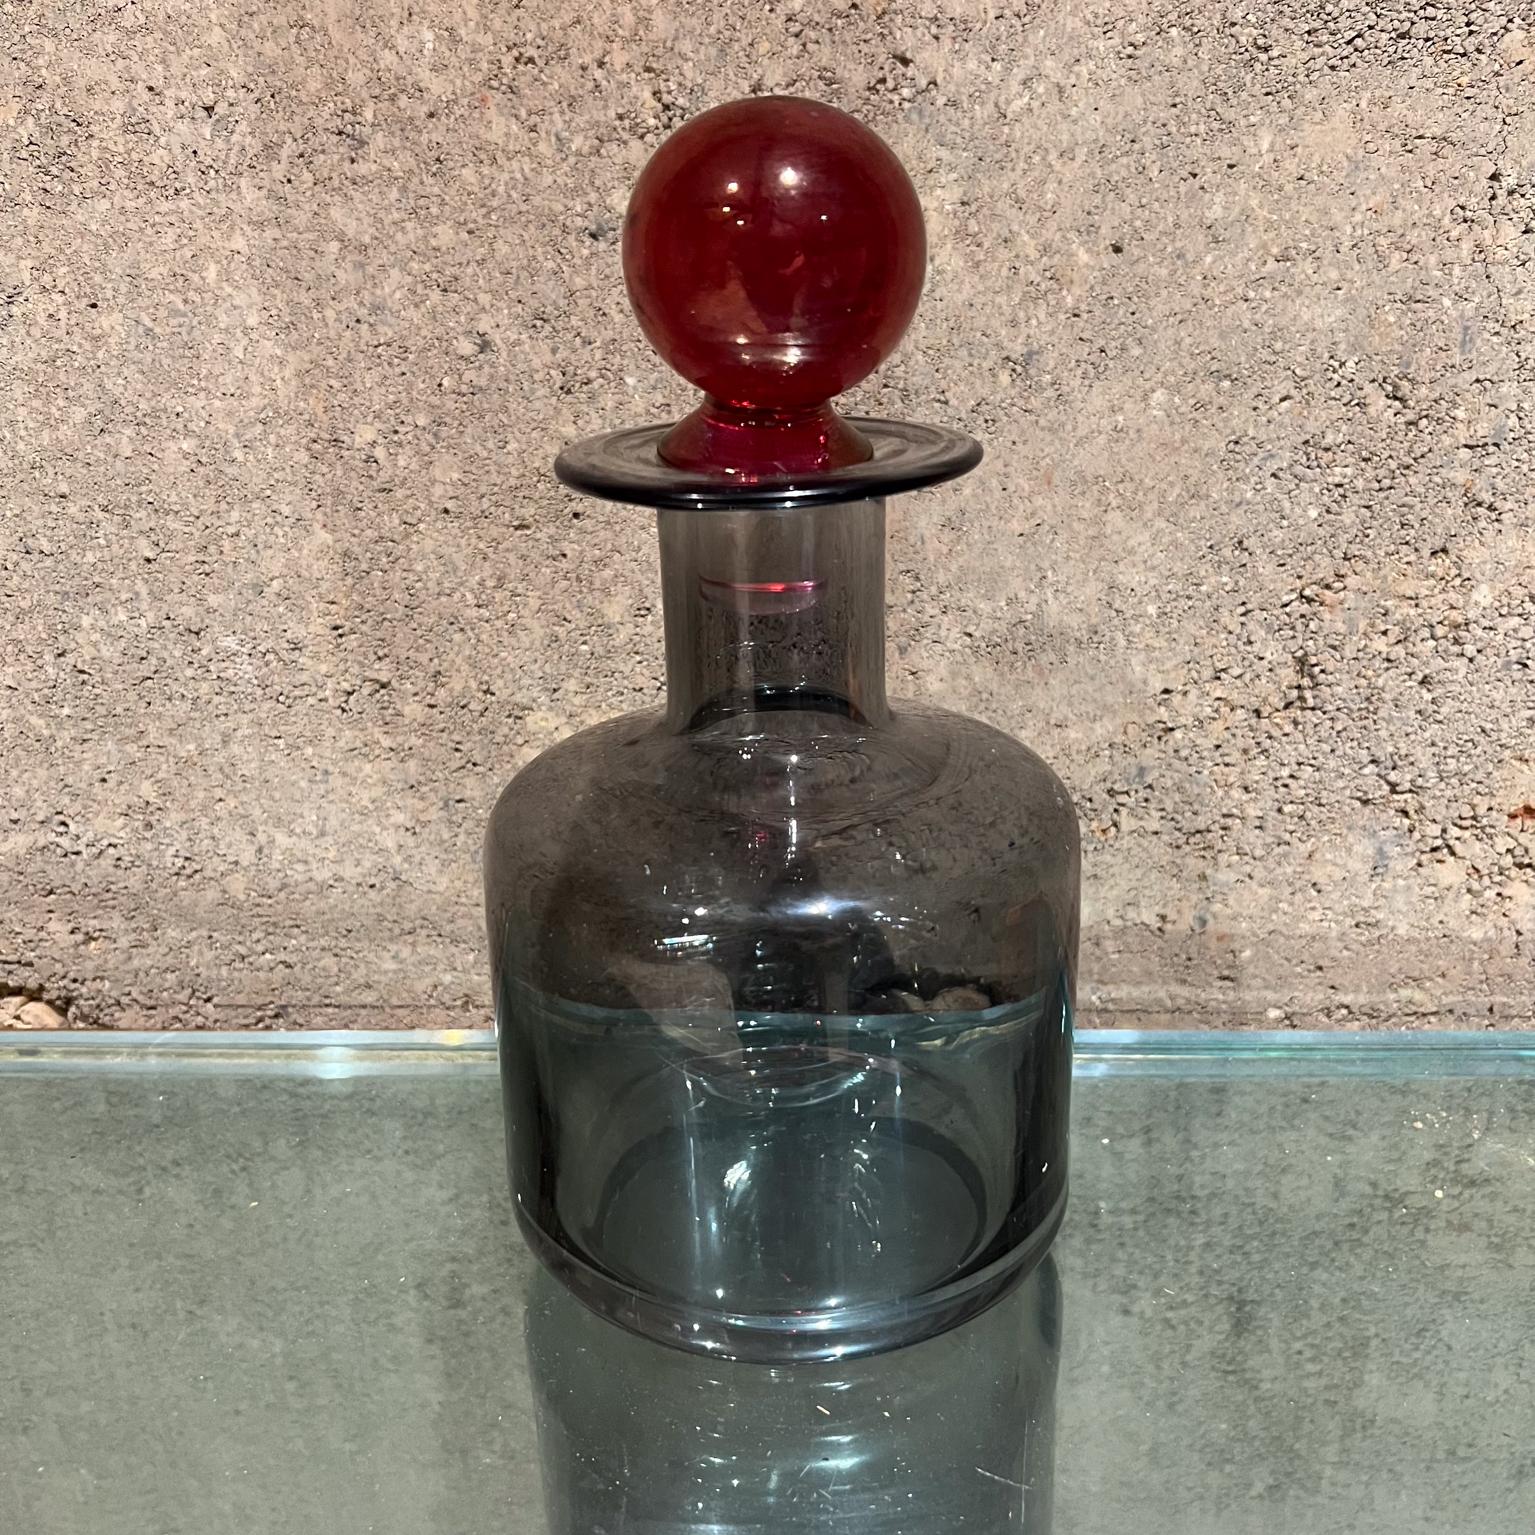 Modern Smoke Glass Decanter with Red Stopper
8.63 h x 4.75 diameter
Original unrestored vintage condition
Refer to images provided.